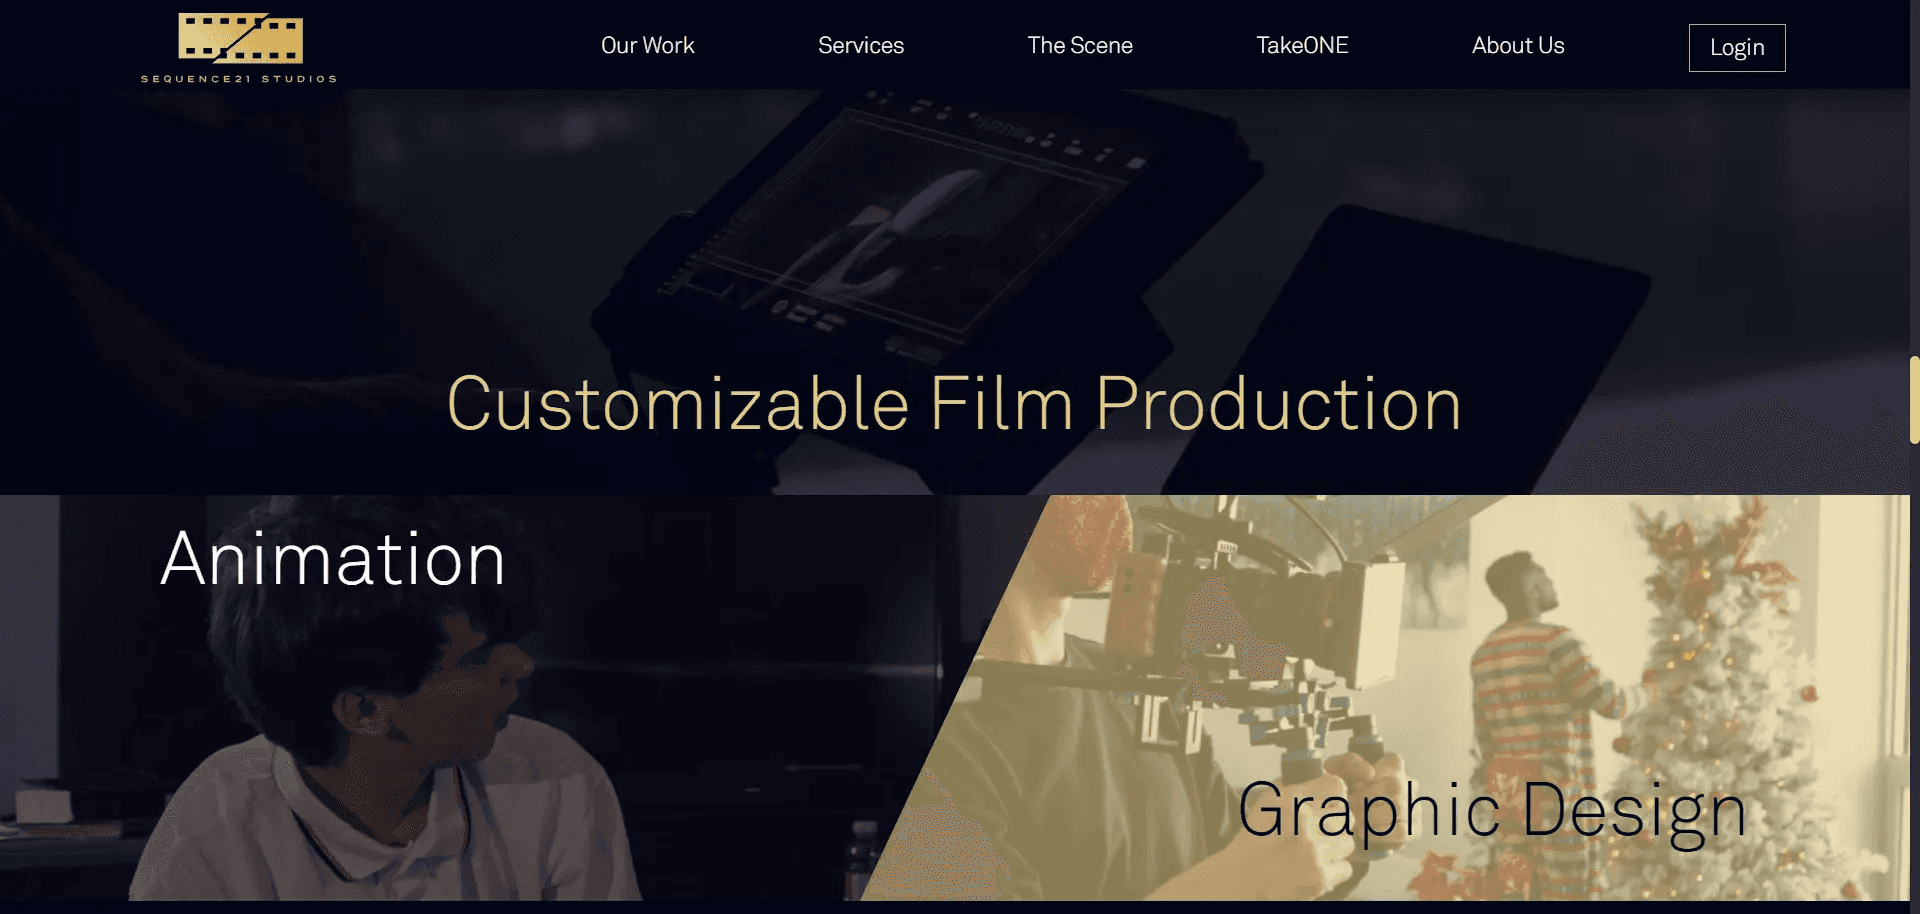 Customizable Film Production, Animation, and Graphic Design are highlighted with large interactive buttons